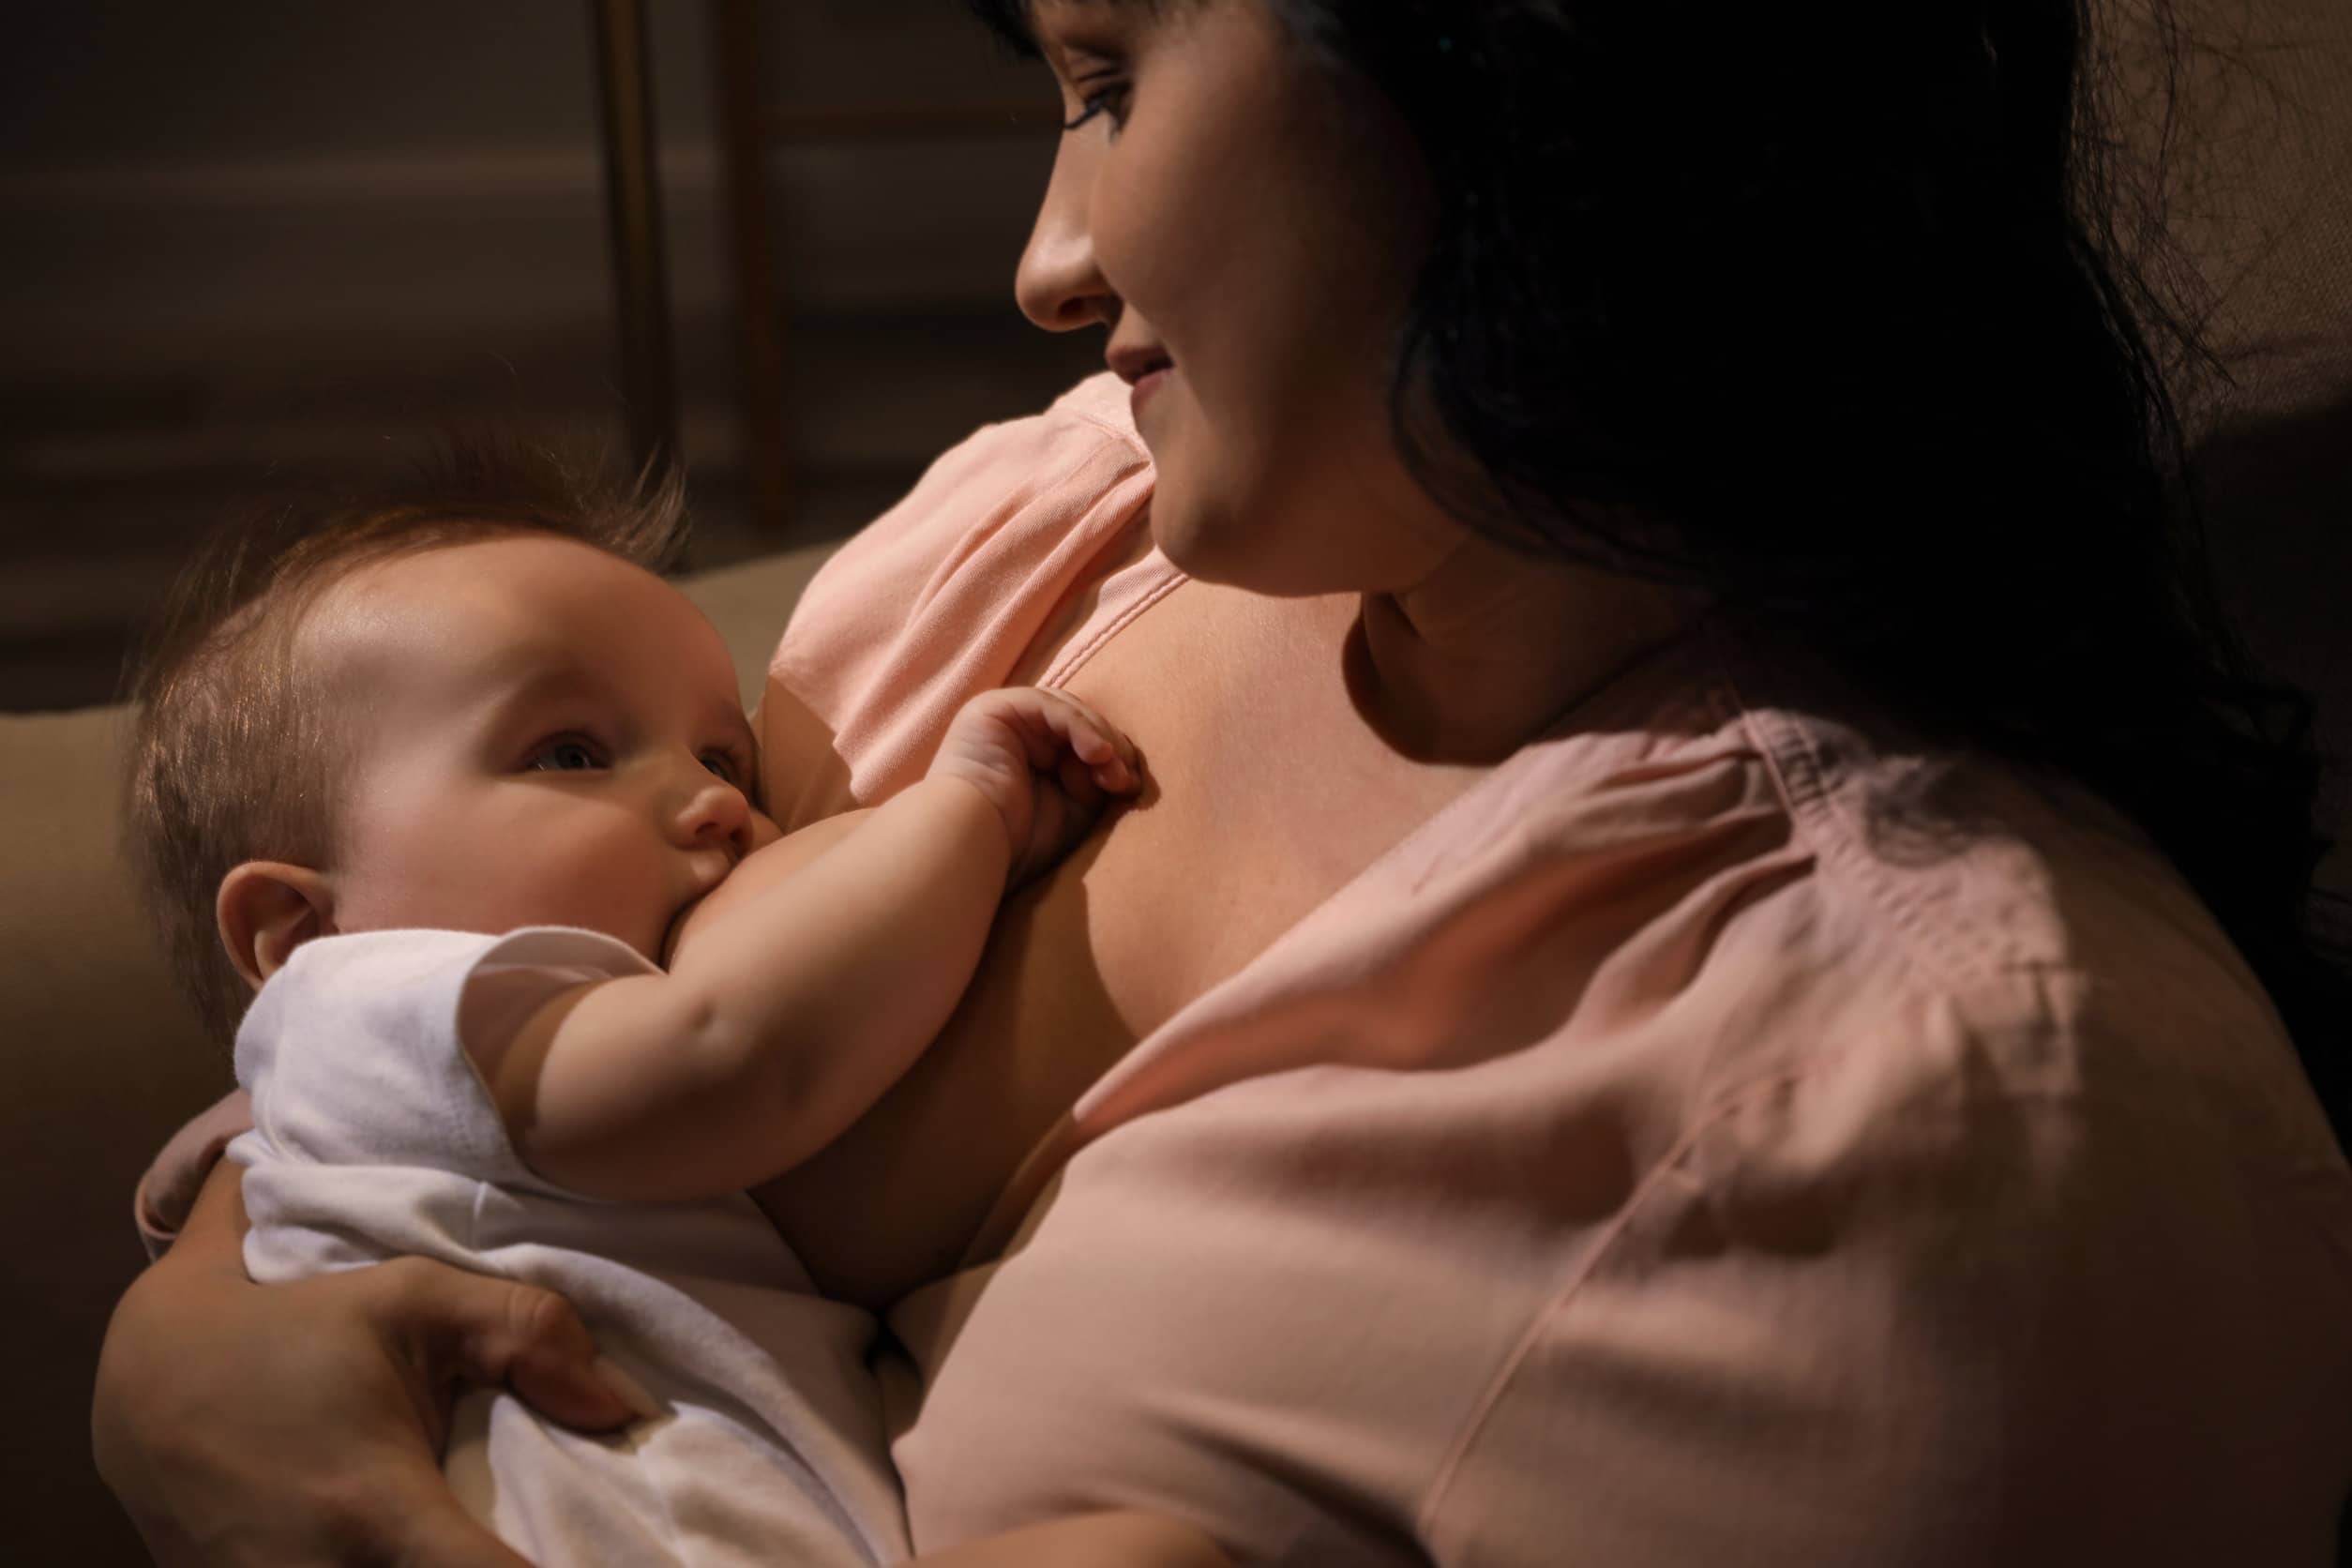 Woman Breastfeeding Her Little Baby On Sofa In Evening